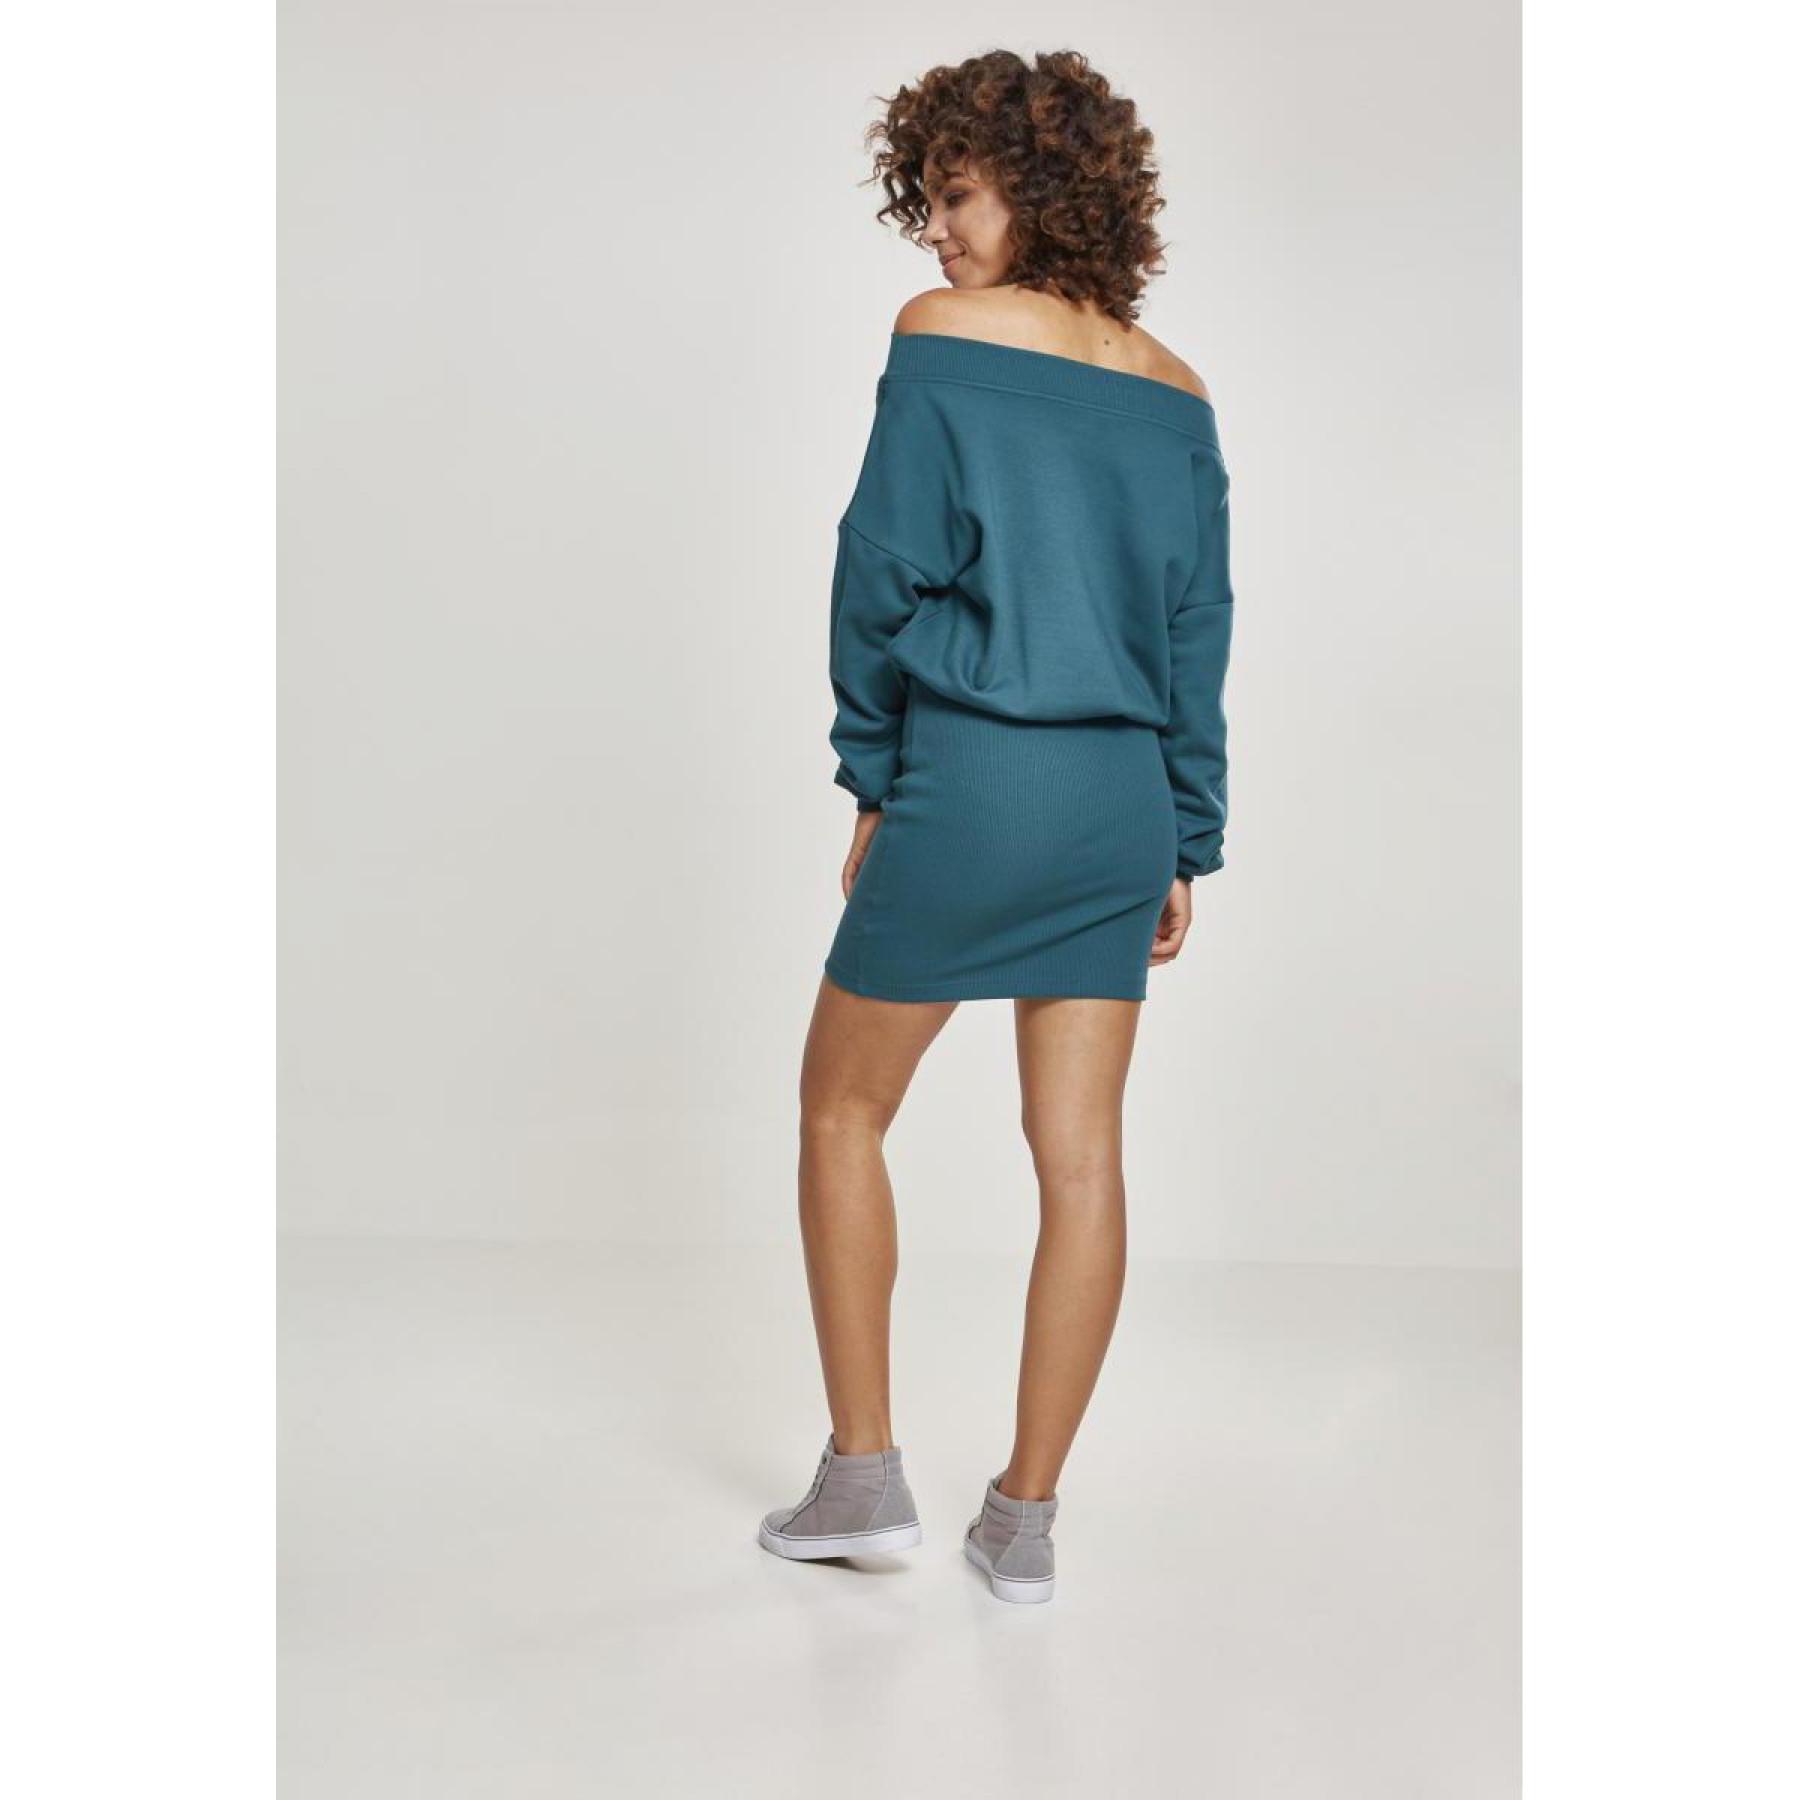 Robe femme grandes tailles Urban Classic sweat